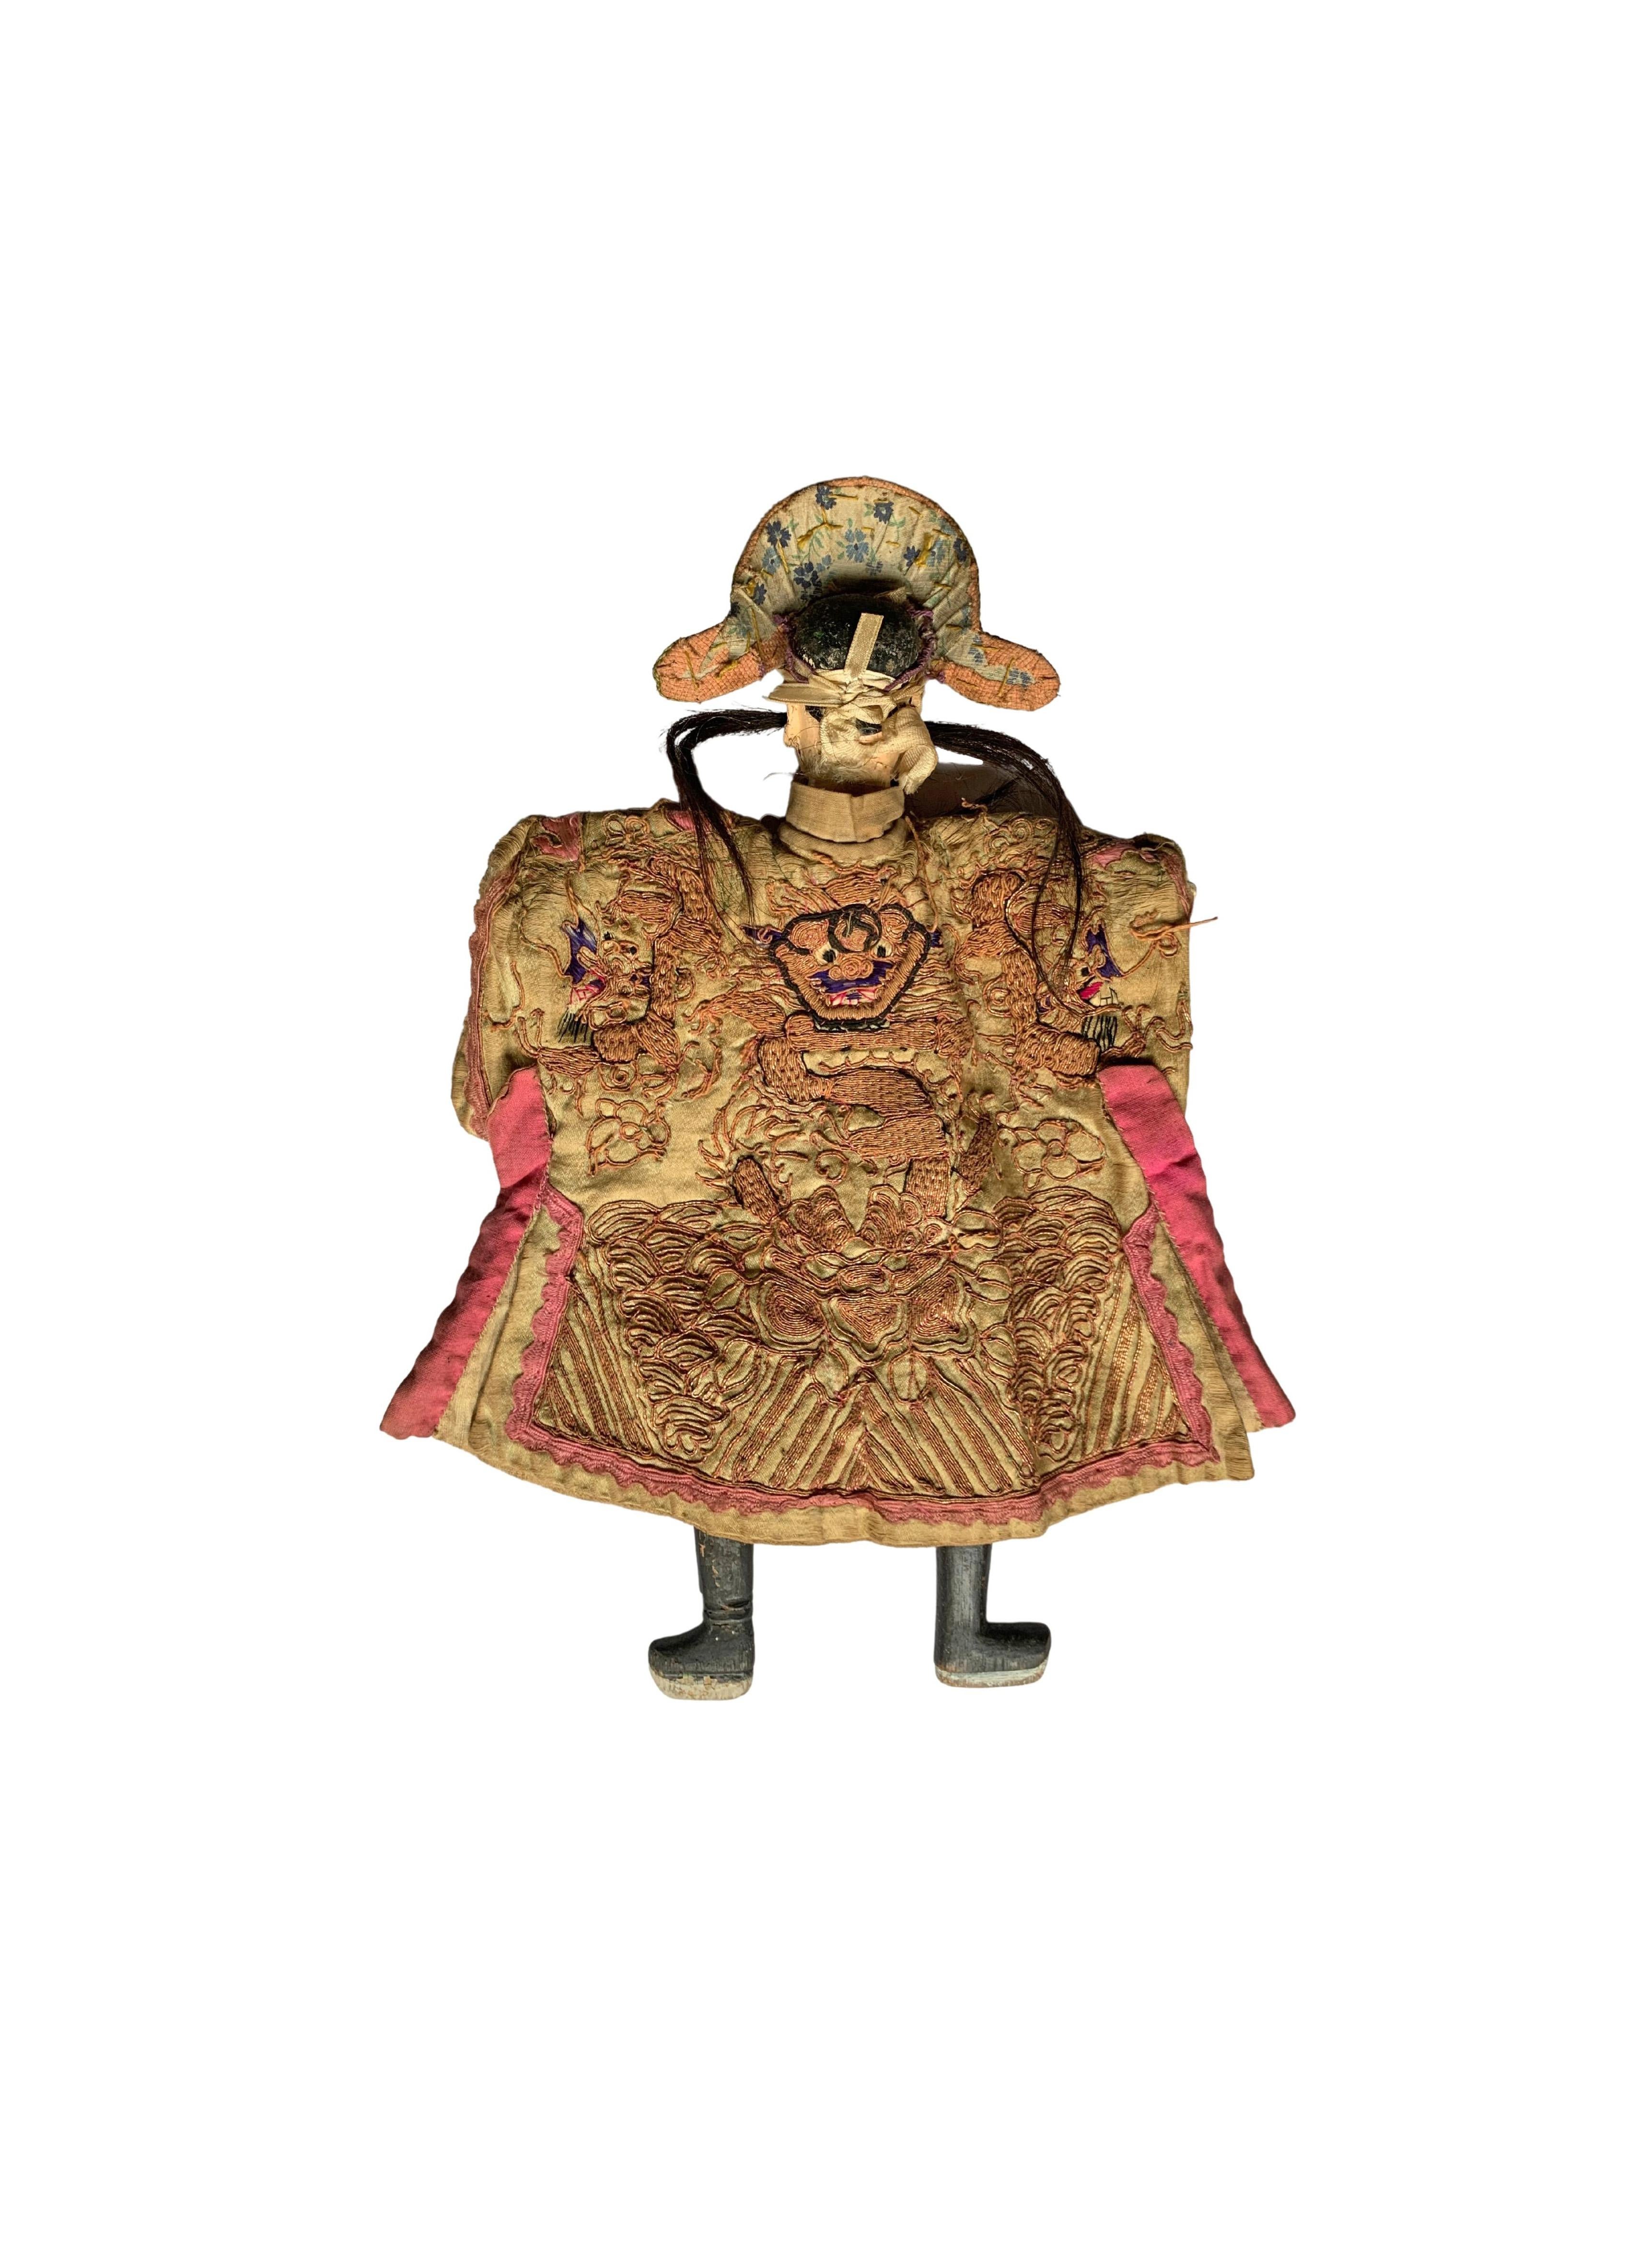 Musuem Quality 19th Century Chinese Hand-Puppet 